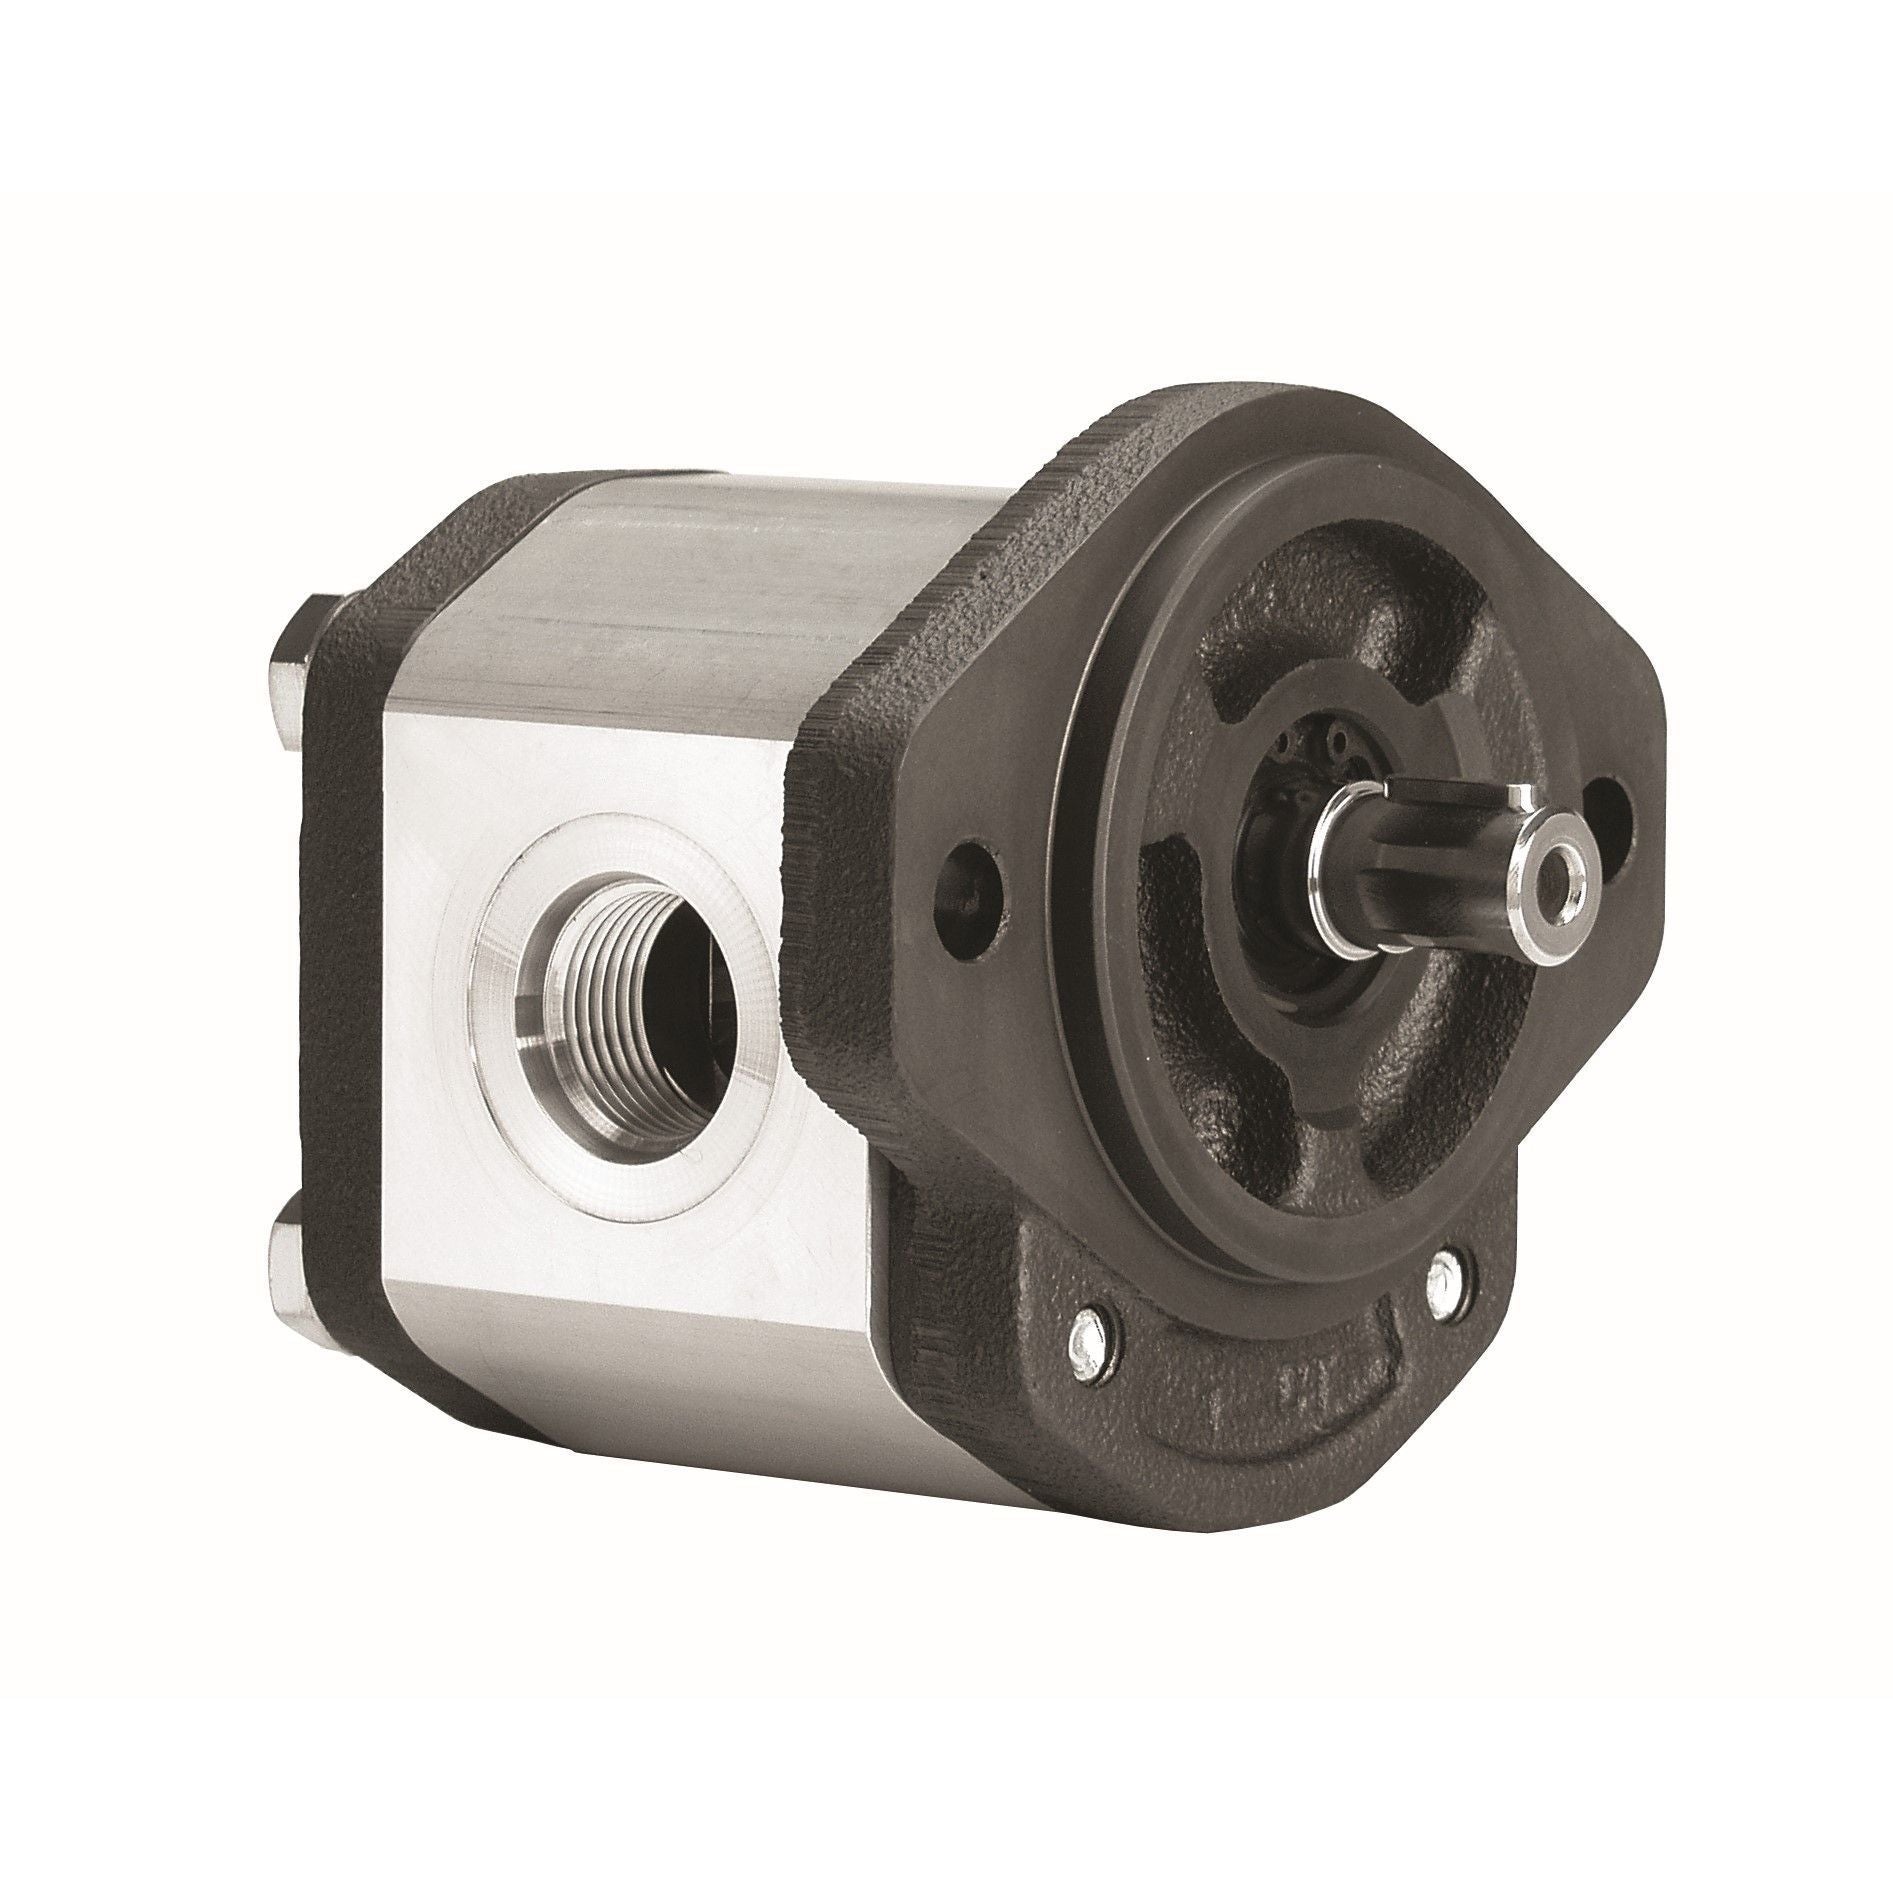 GHP2A-D-25 : Marzocchi Gear Pump, CW, 17.9cc (1.0919in3), 8.51 GPM, 3770psi, 2500 RPM, #12 SAE (3/4") In, #10 SAE (5/8") Out, Keyed Shaft 5/8" Bore x 5/32" Key, SAE A 2-Bolt Mount